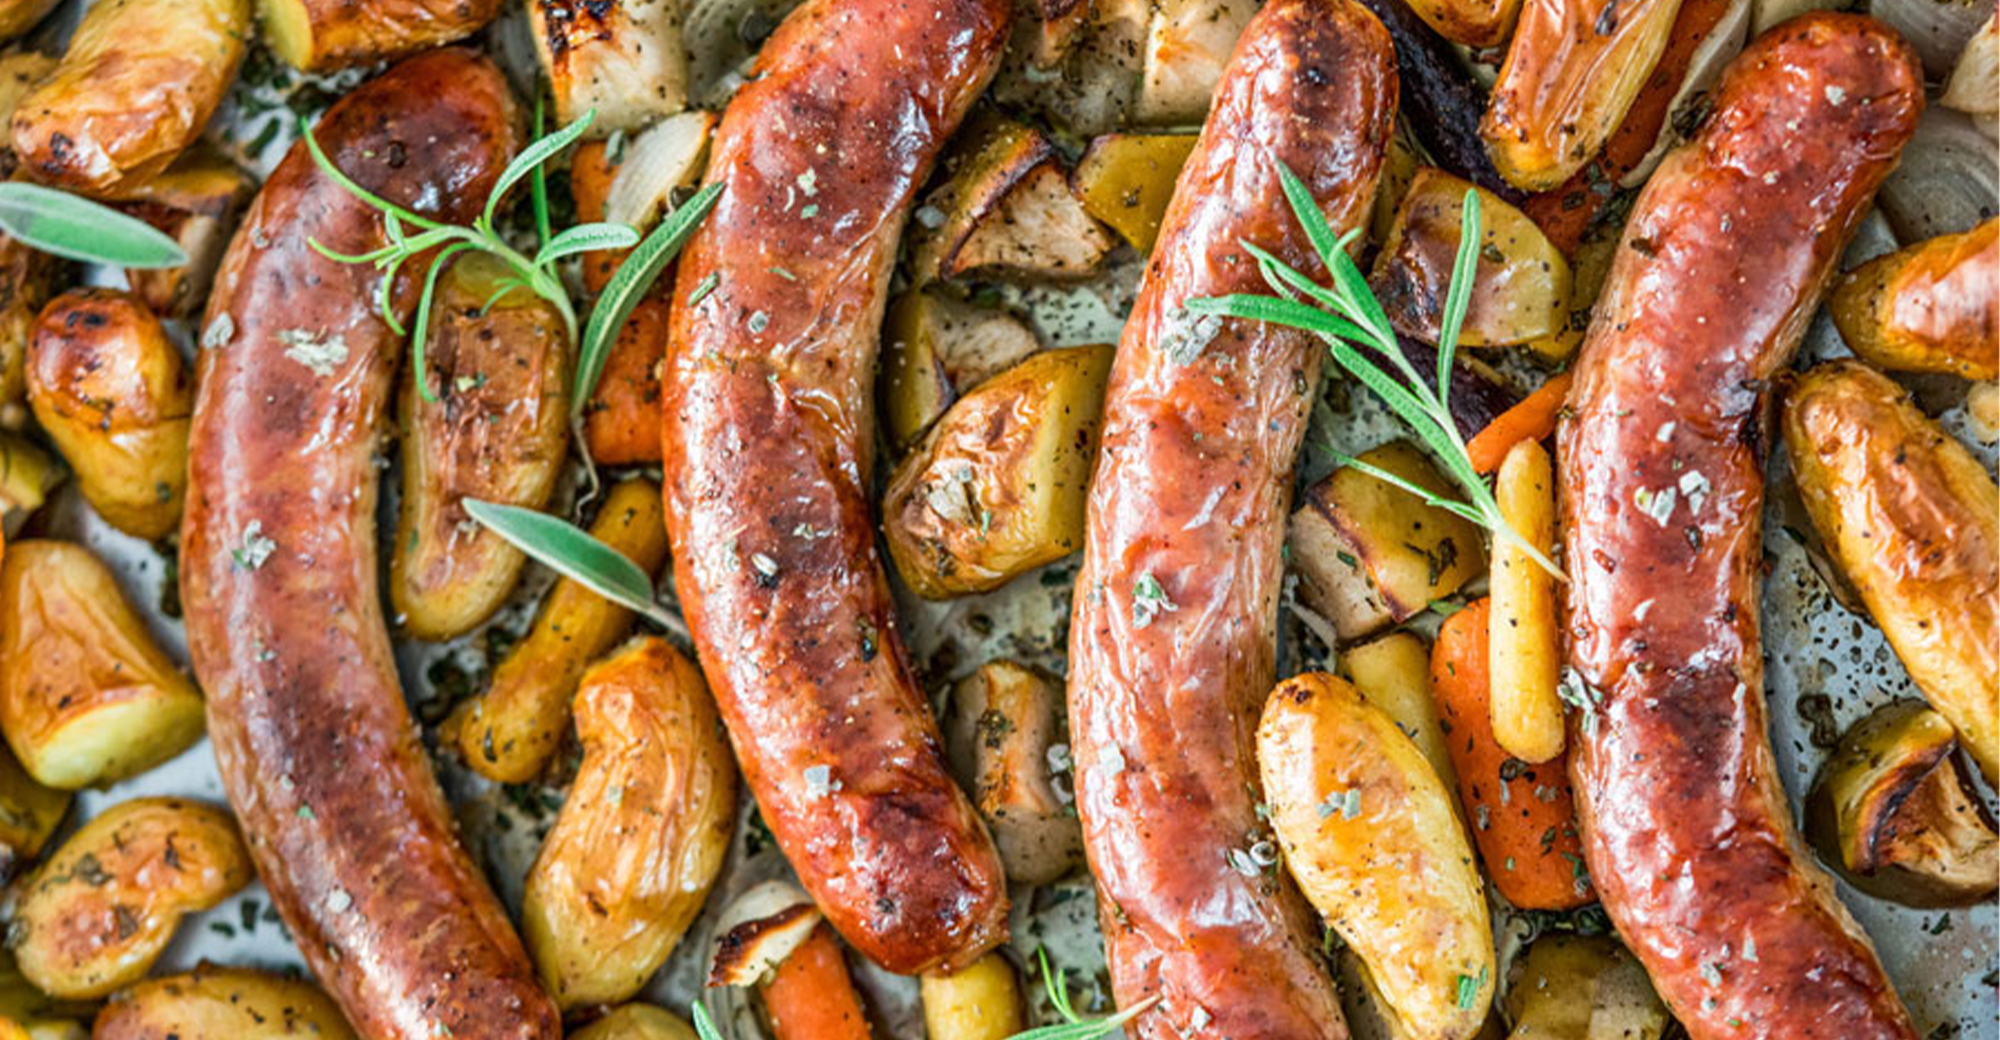 Oven Roasted Sausages with Caramelized Apples and Shallots